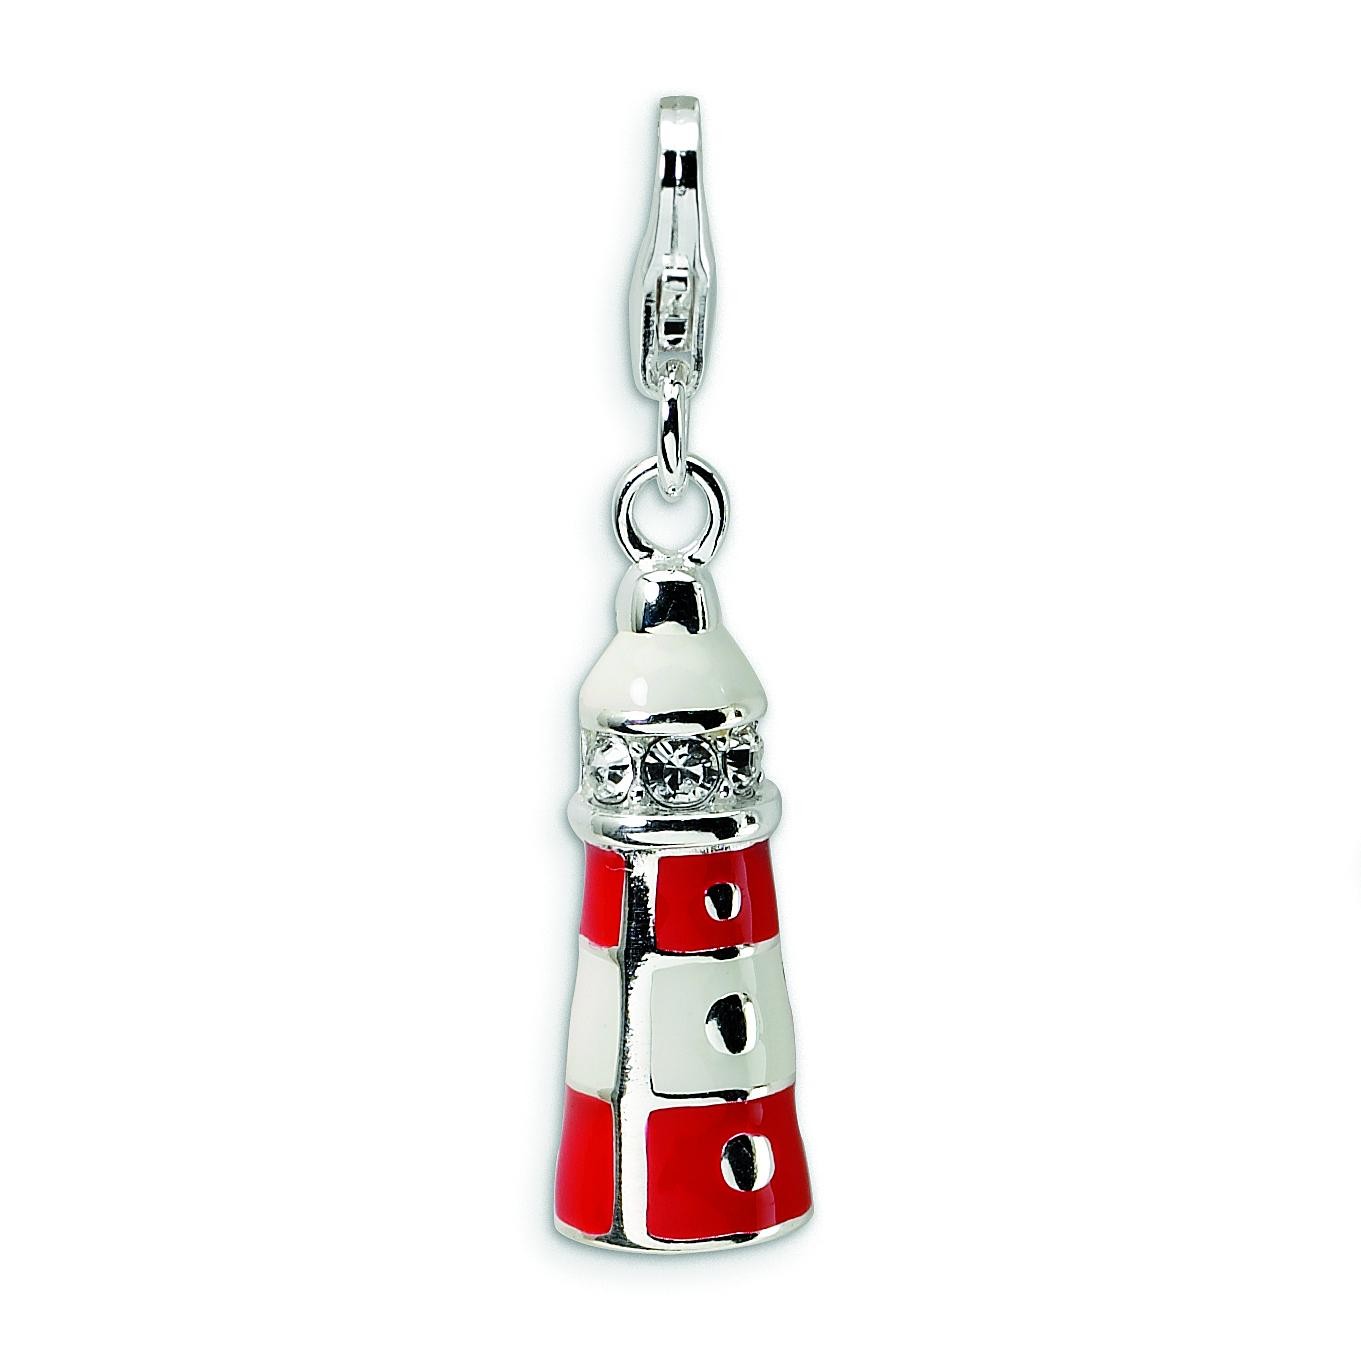 Enamel Swarovski Crys Lighthouse Lobster Clasp Charm in Sterling Silver